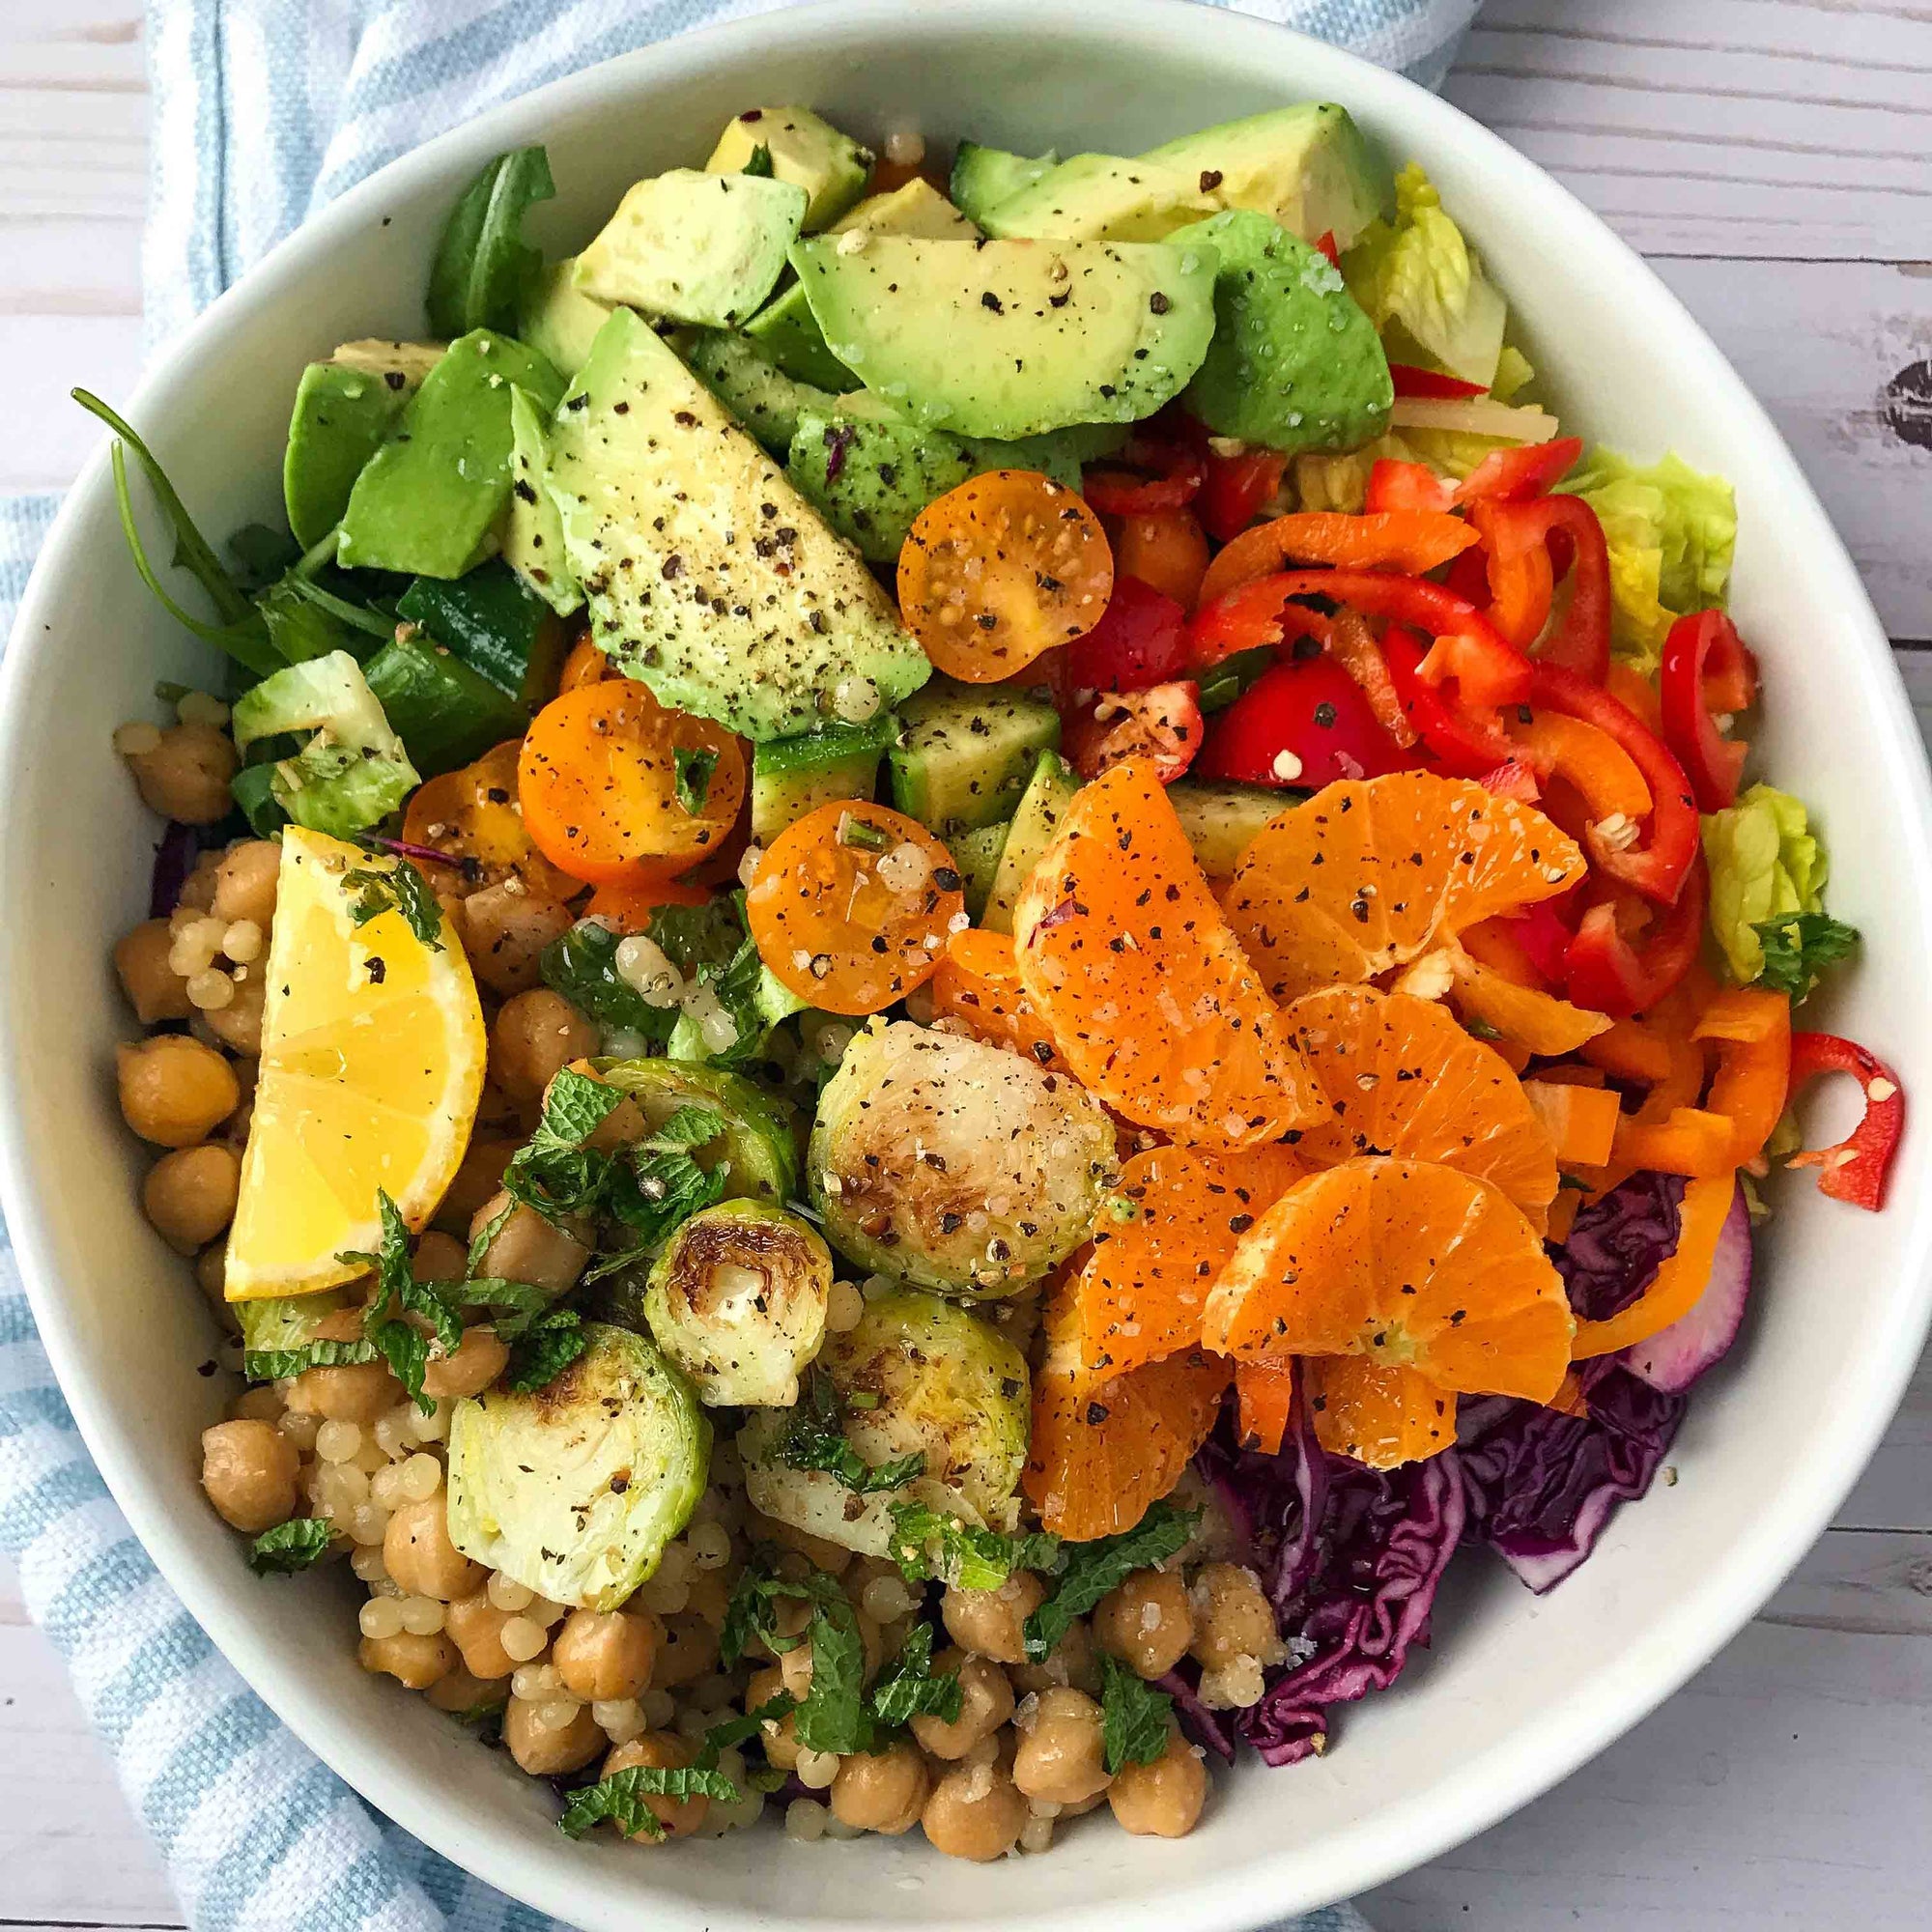 Warm Chickpea and Couscous Salad